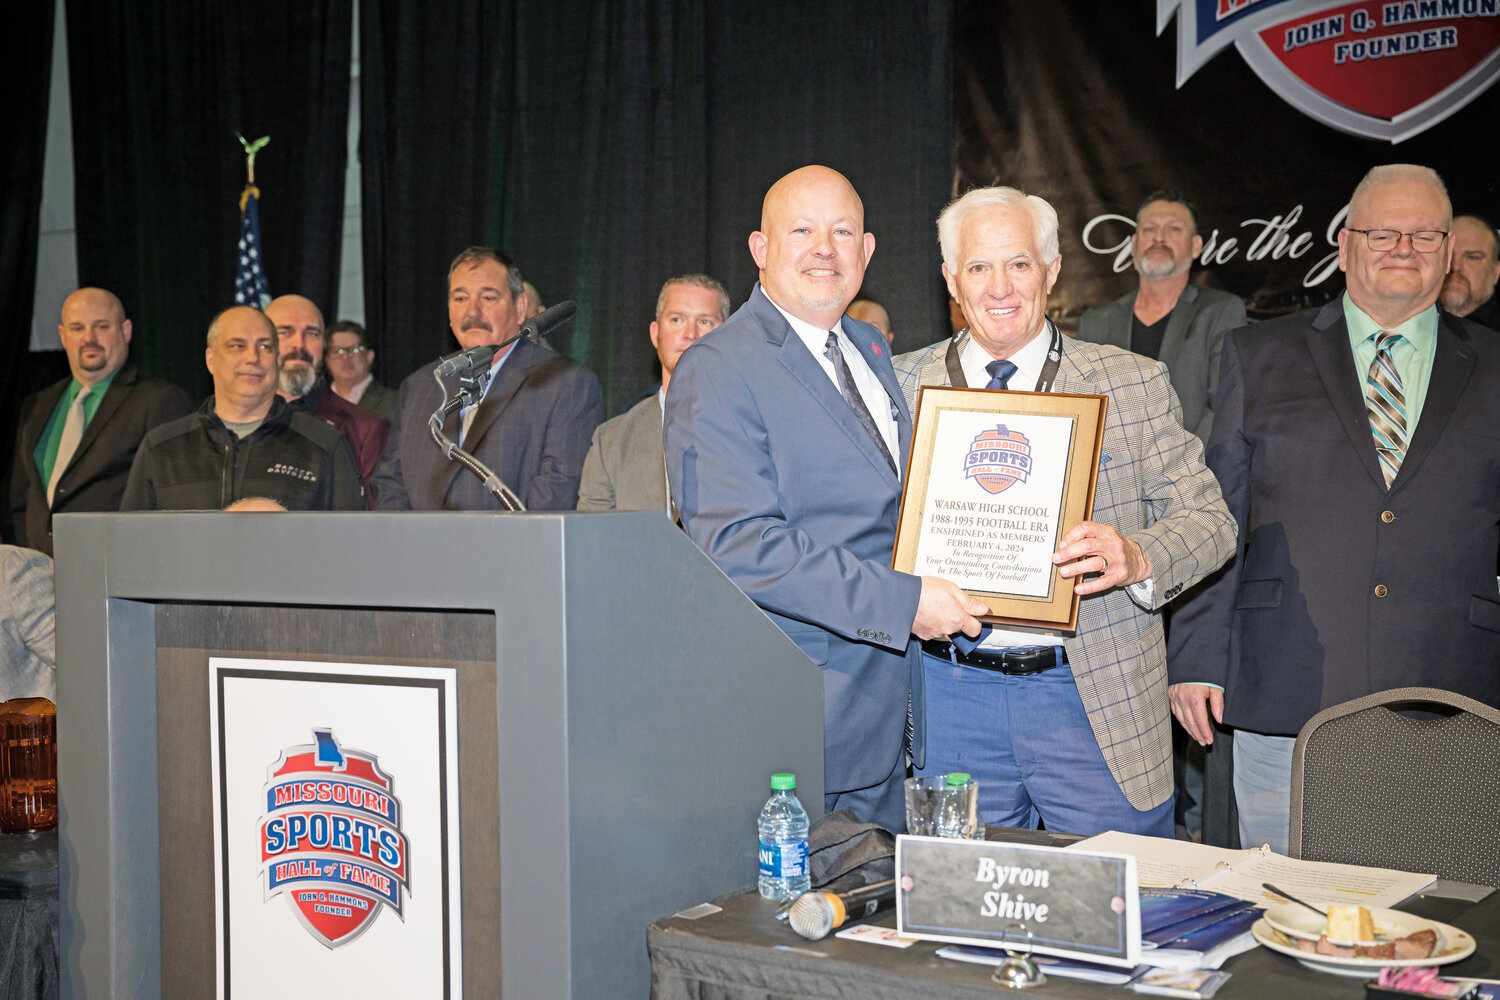 AN HONOR WELL DESERVED, the Warsaw Wildcats football 1988-95 program era was part of the Enshrinement Class of 2024 into the Missouri Sports Hall of Fame at a ceremony held on Sunday.  On behalf of himself and many other coaches, staff and players in attendance, former coach Randy Morrow received the award from CEO/Executive Director of the Missouri Sports Hall of Fame, Byron Shive.